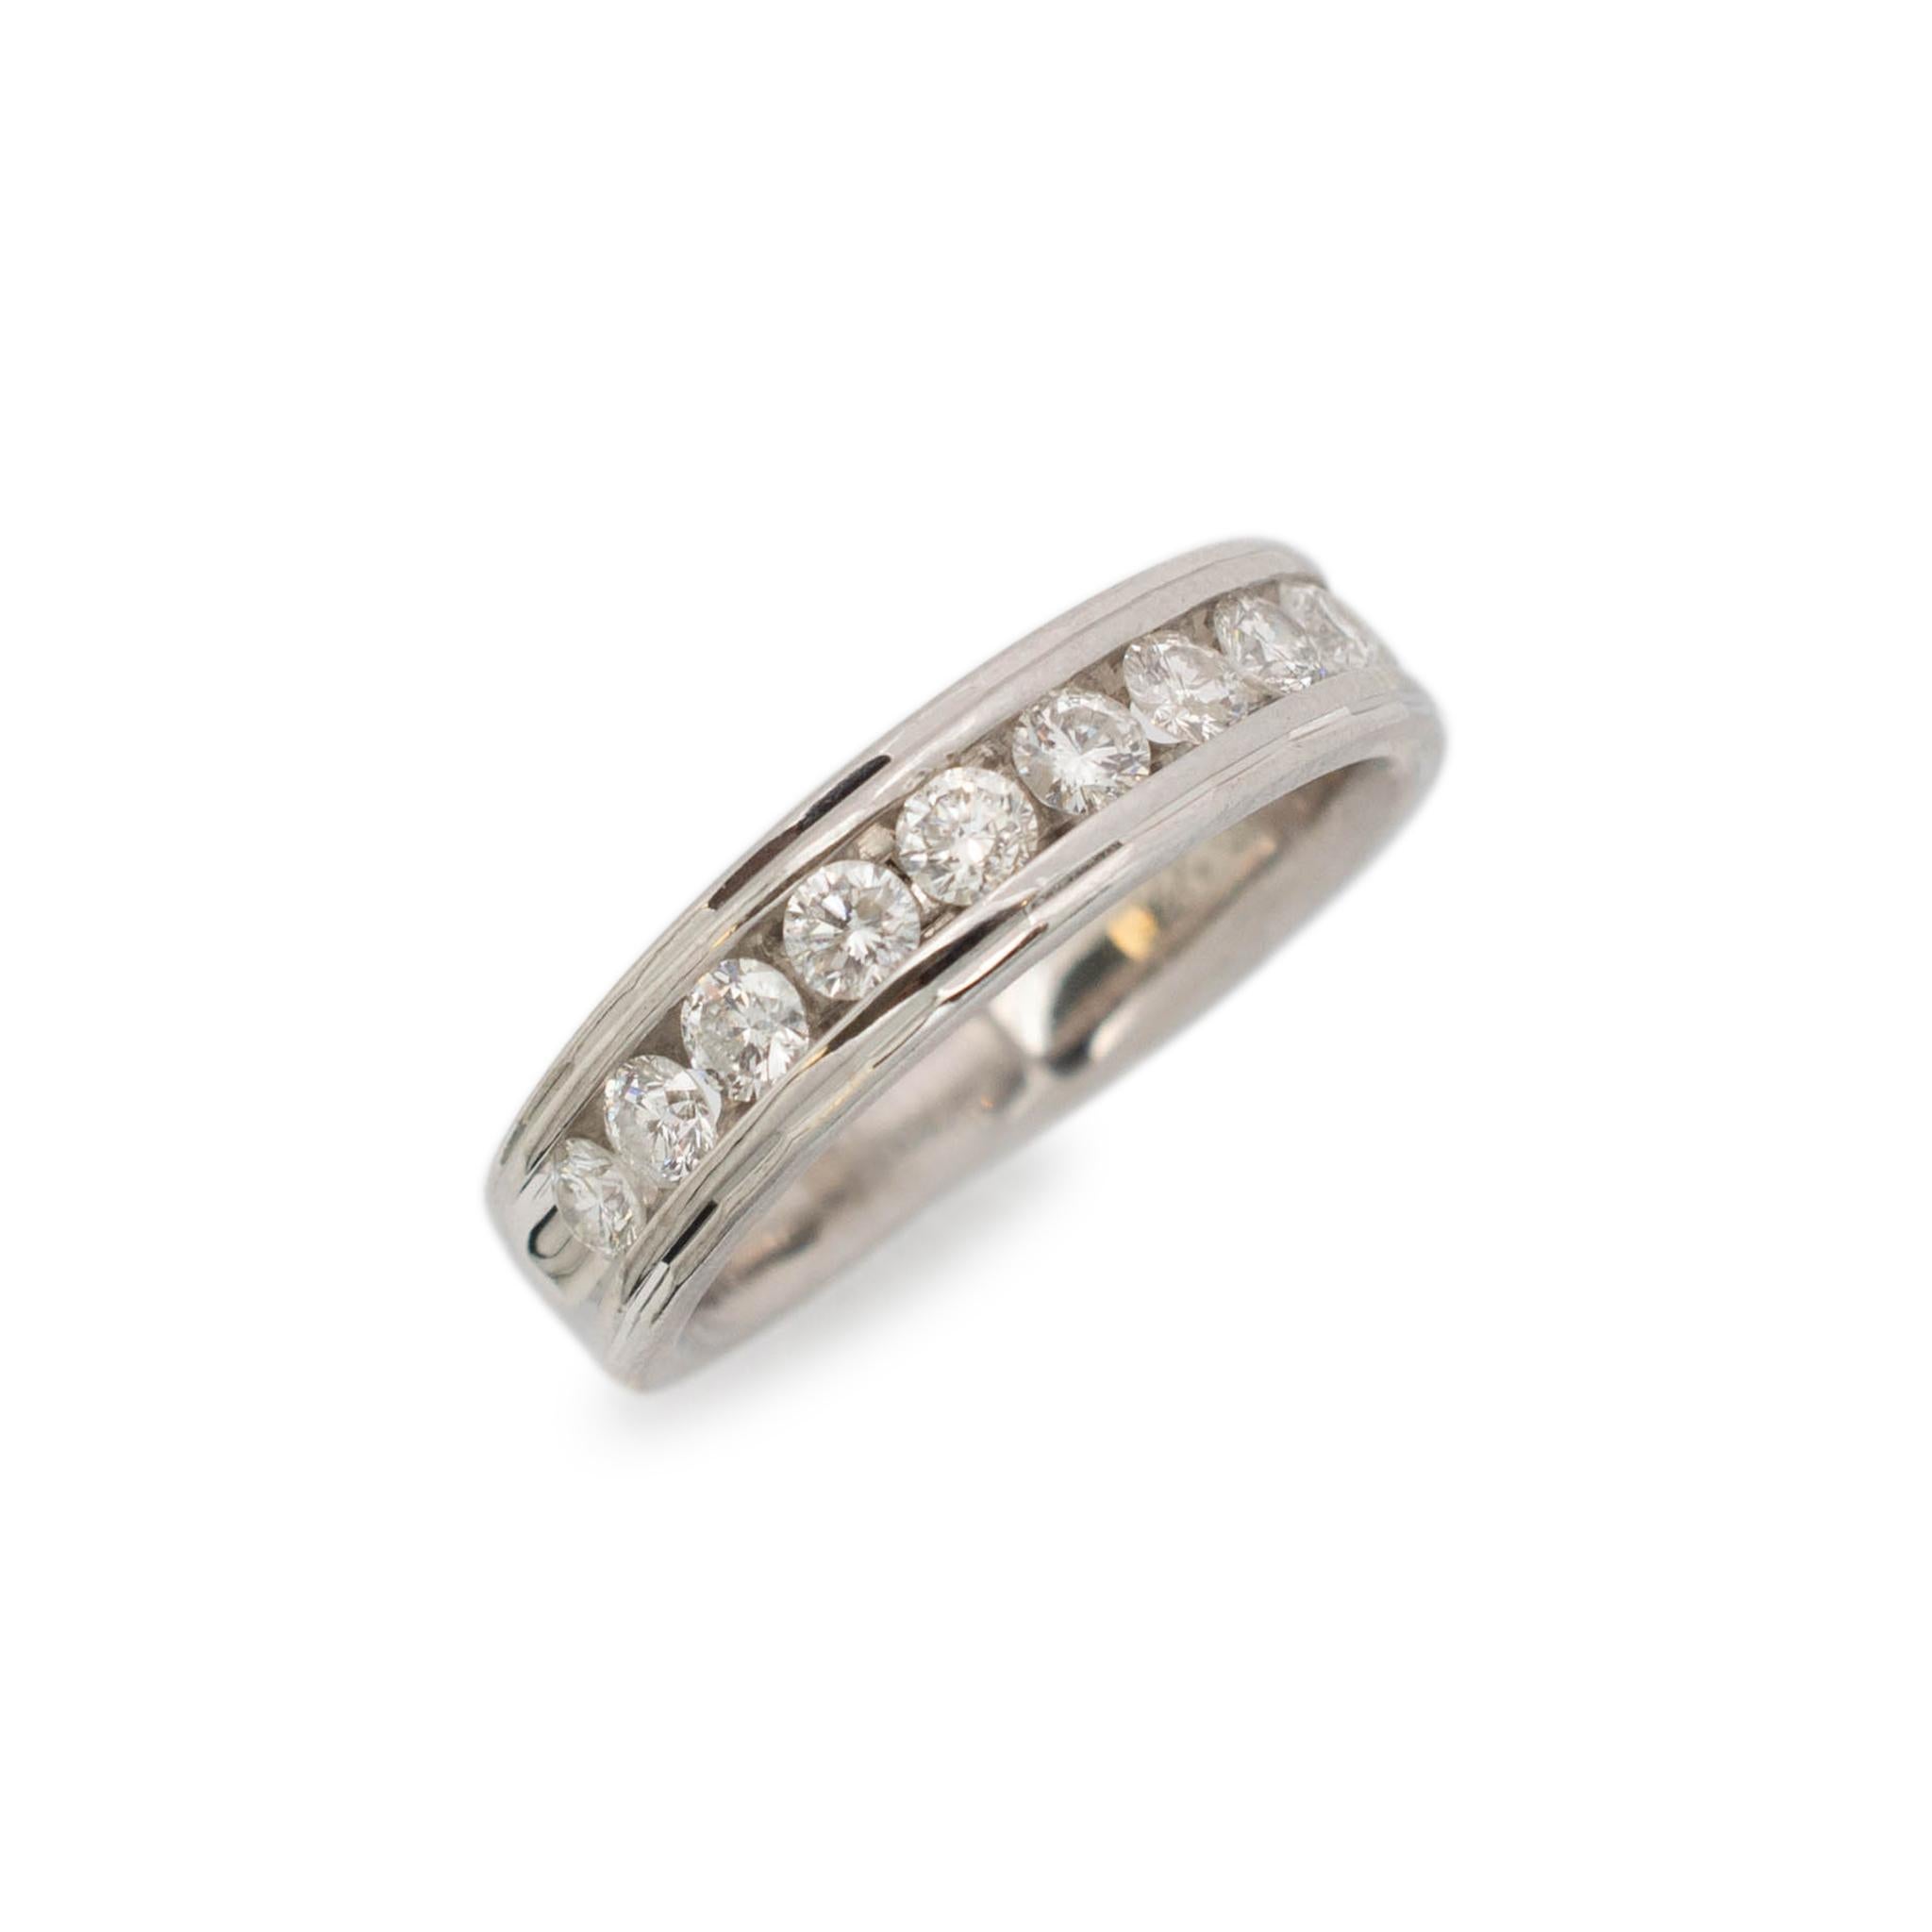 Gender: Unisex

Material: 14K White Gold

Size: 9

Shank Width: 5.85 mm

Weight: 7.15 Grams

14K white gold ten-across diamond wedding band with a half-round shank. Engraved with 